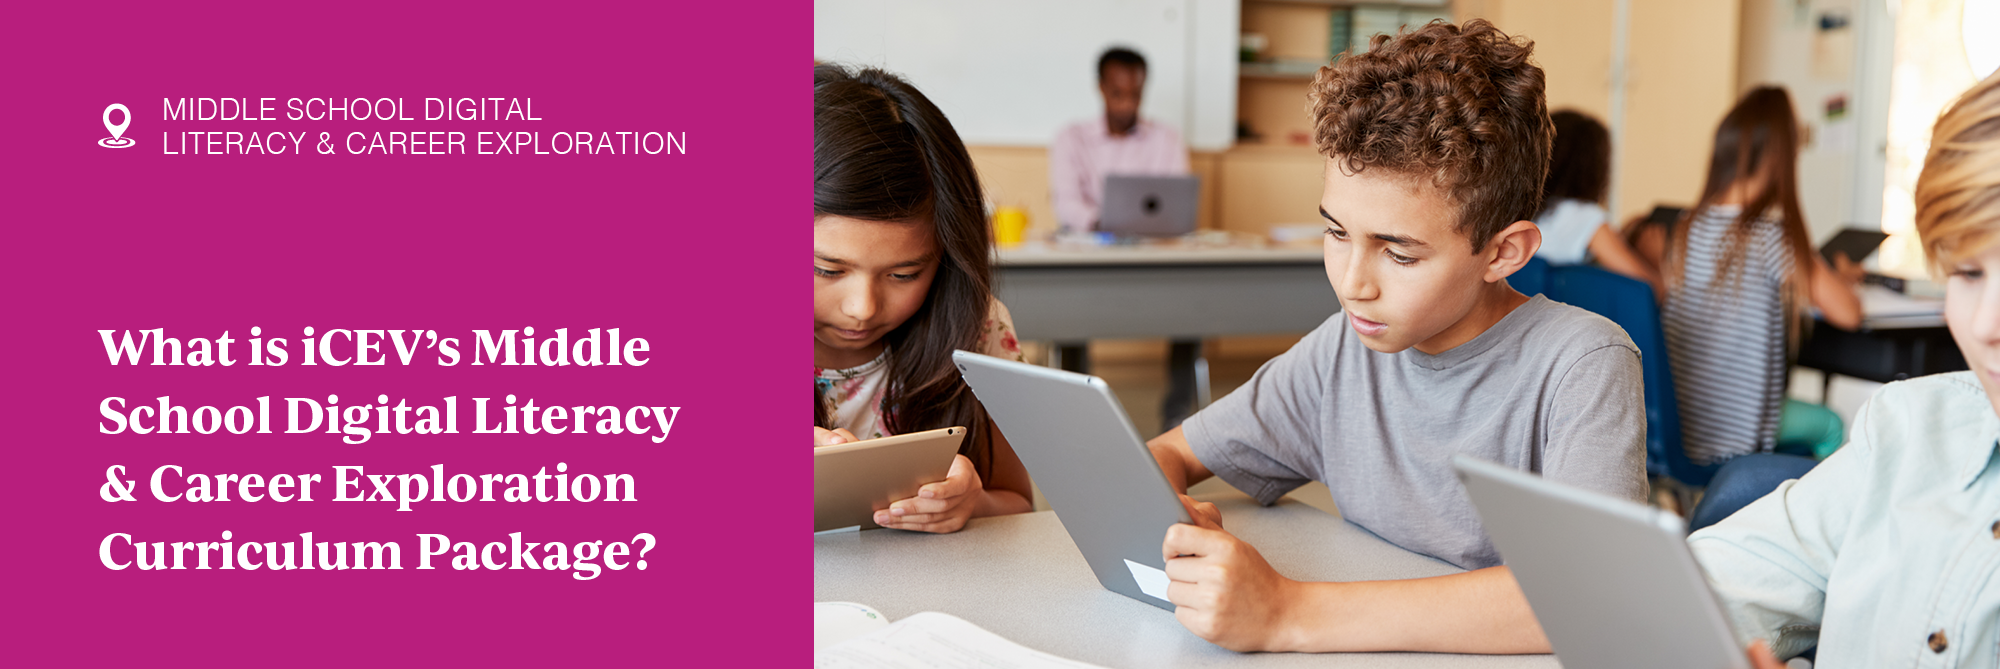 What is iCEV’s Middle School Digital Literacy & Career Exploration Curriculum Package?